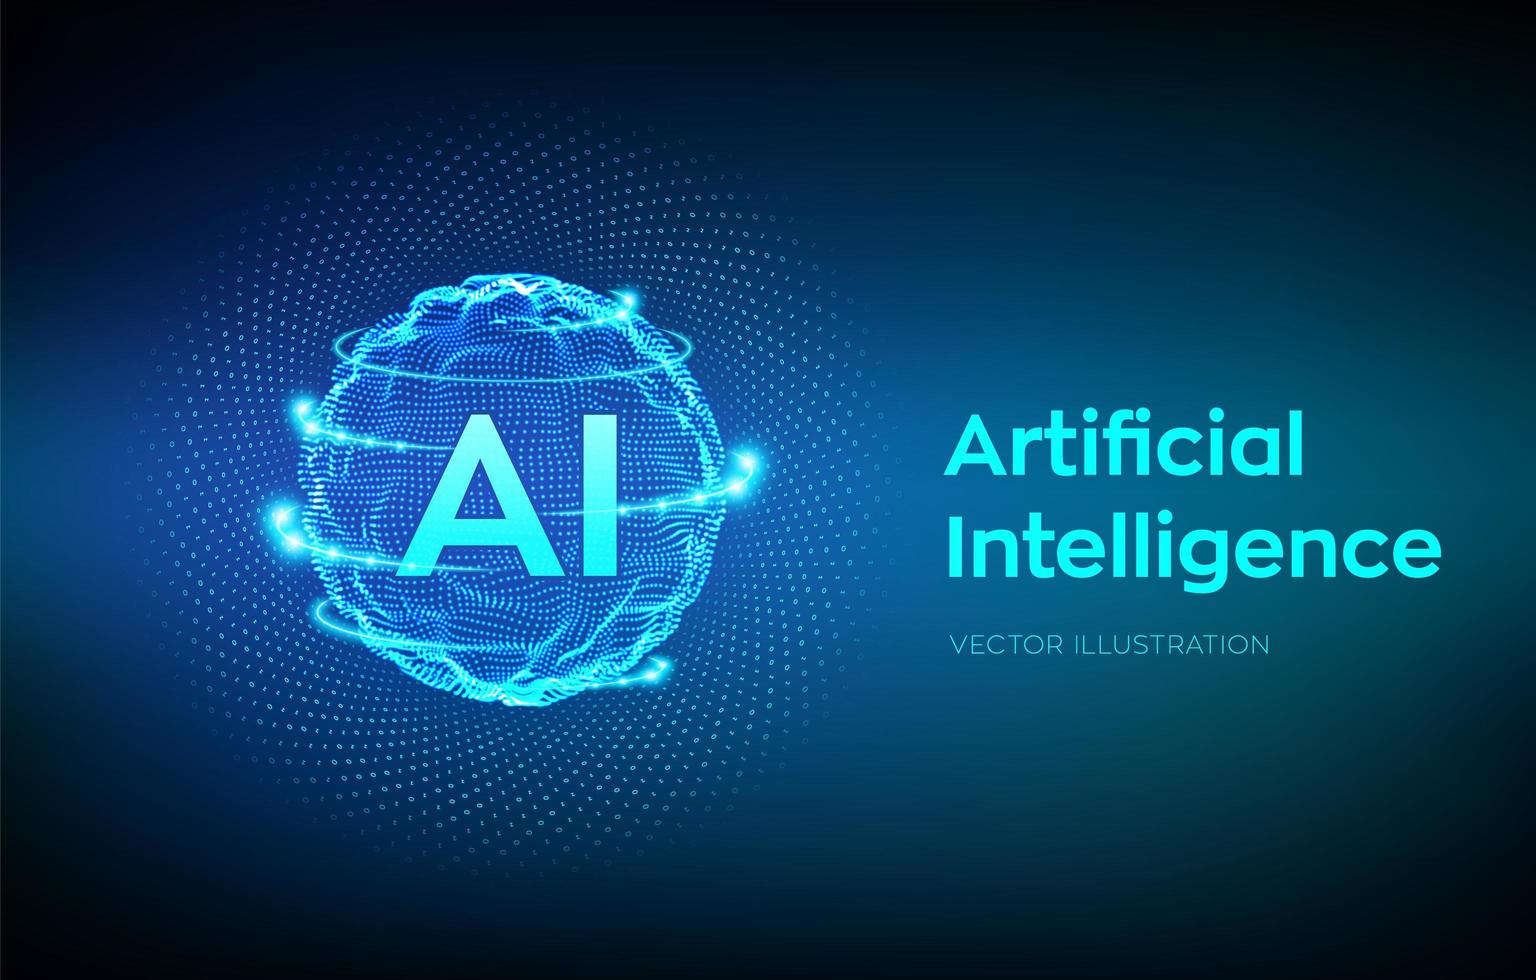 Artificial Intelligence Background Concept  vector